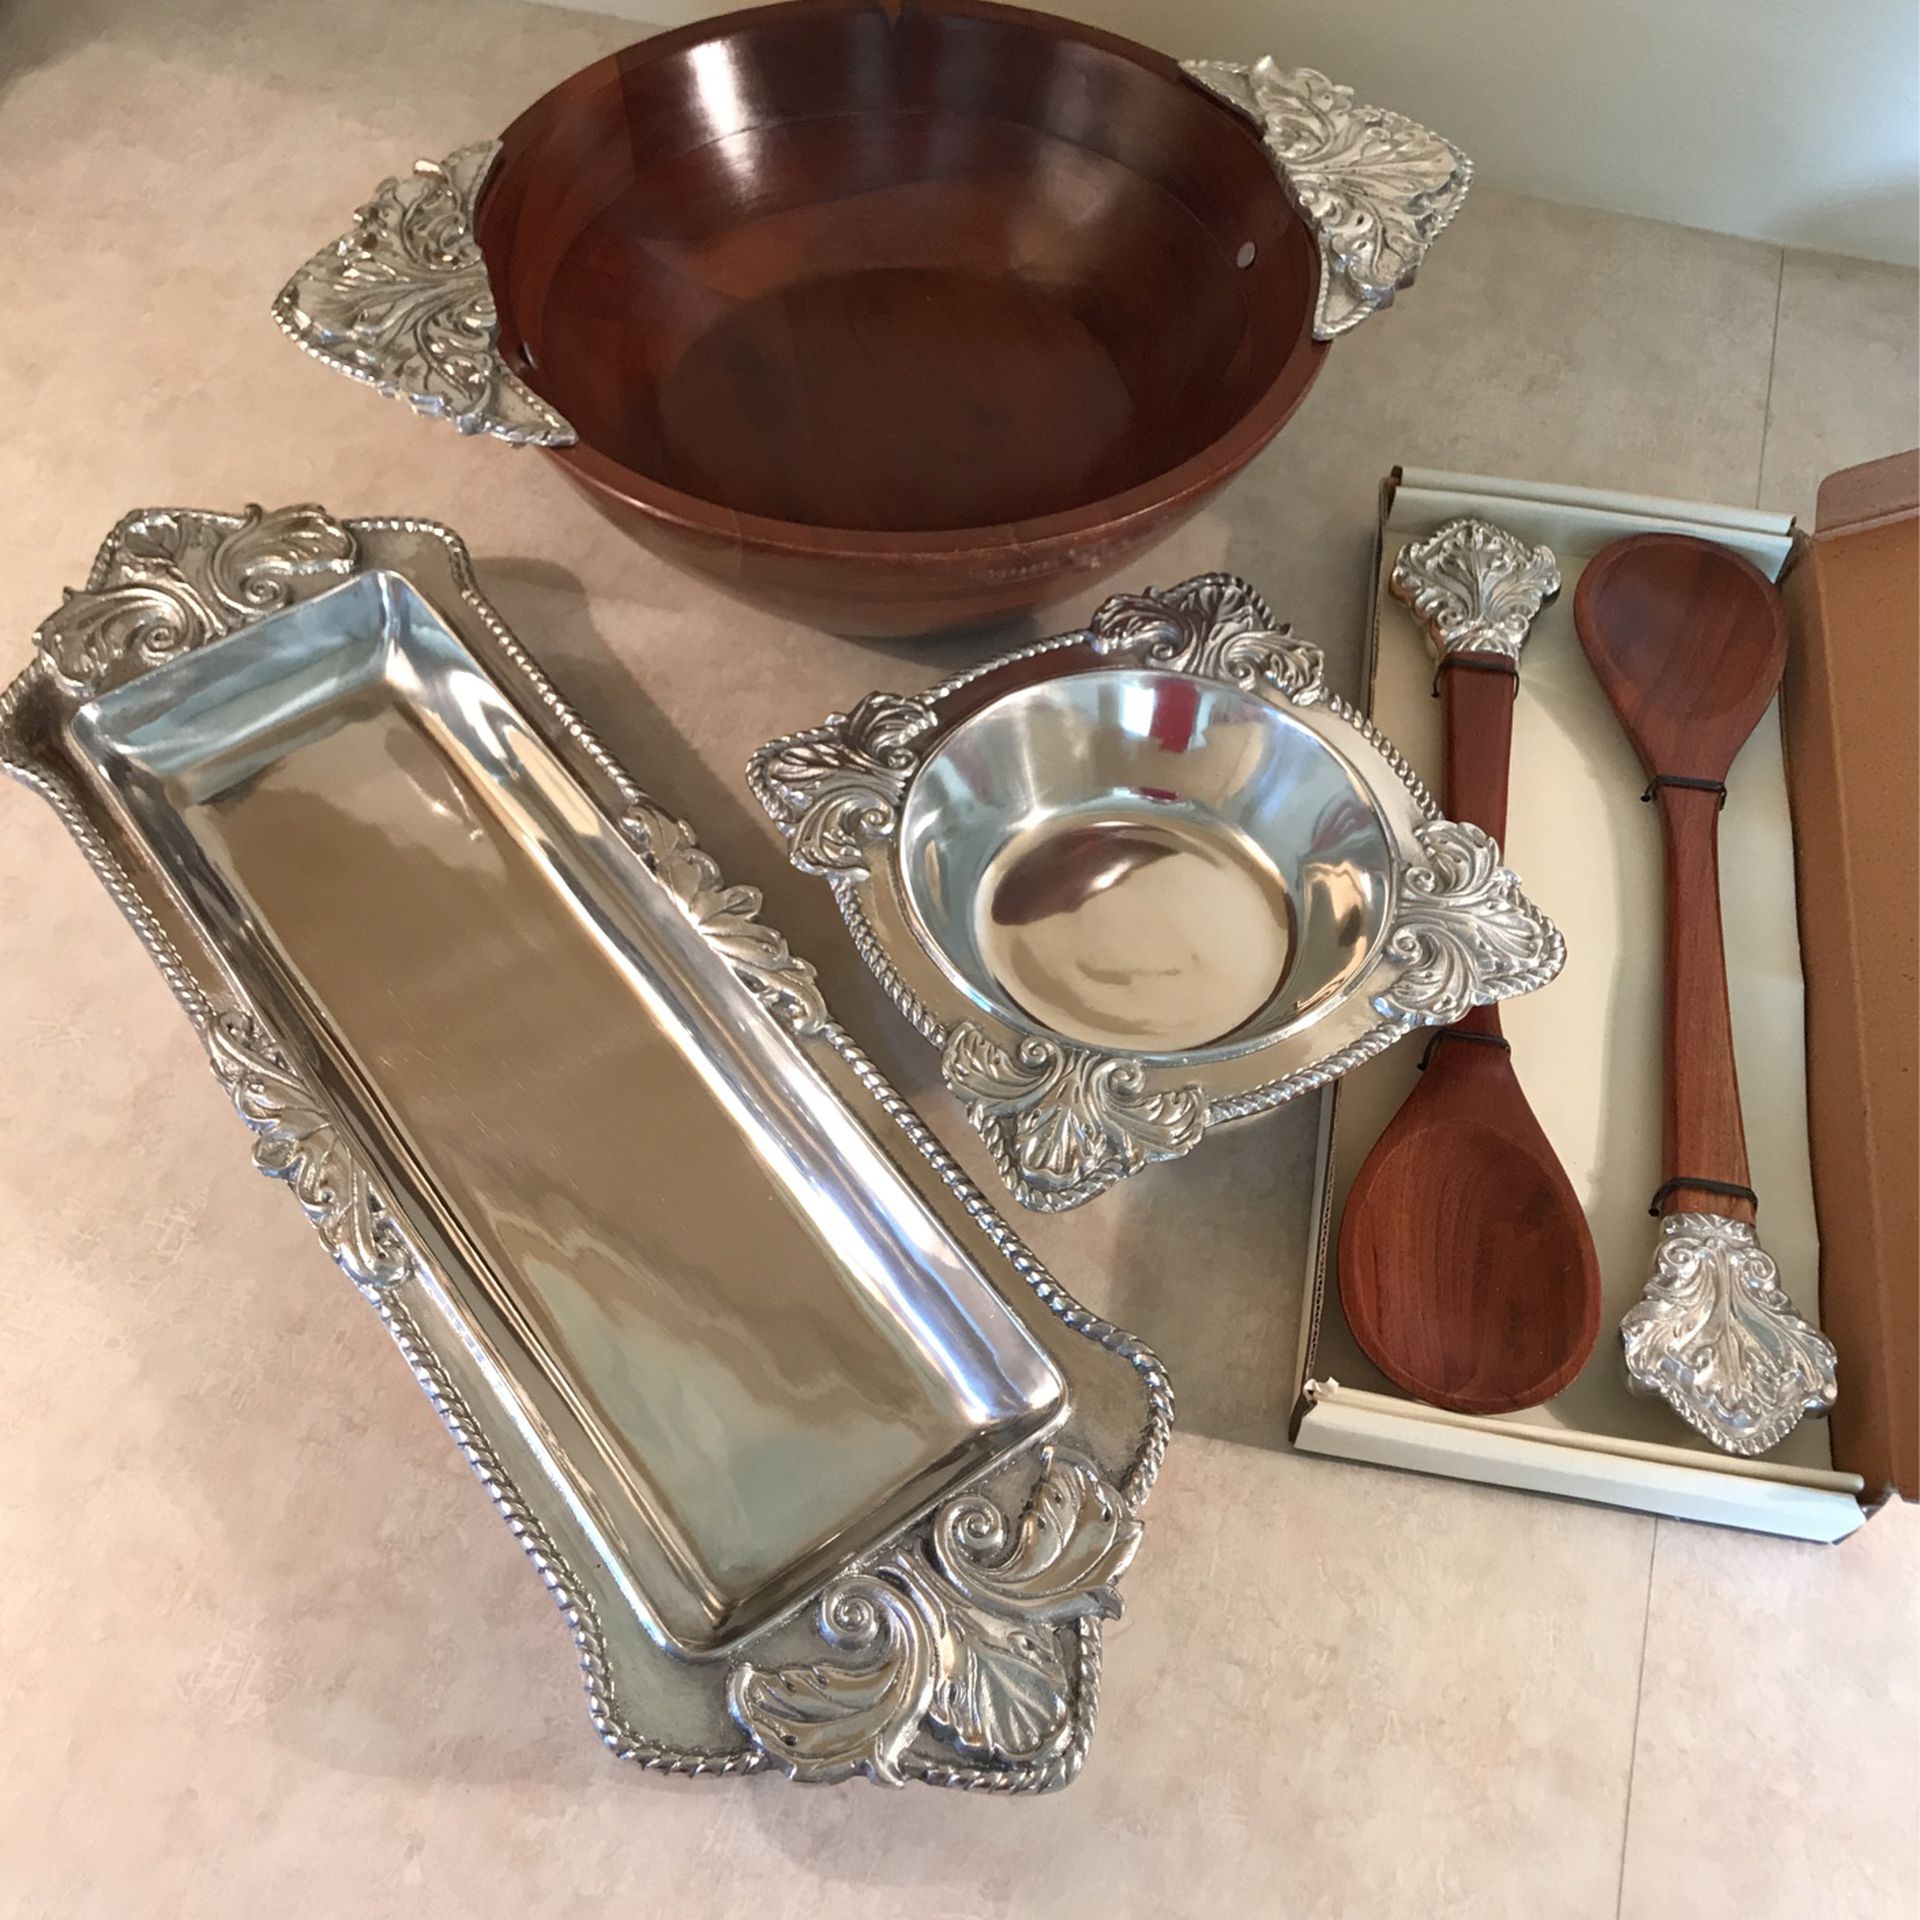 Reba  serving collection - bowl,  spoons, tray, & bottle coaster